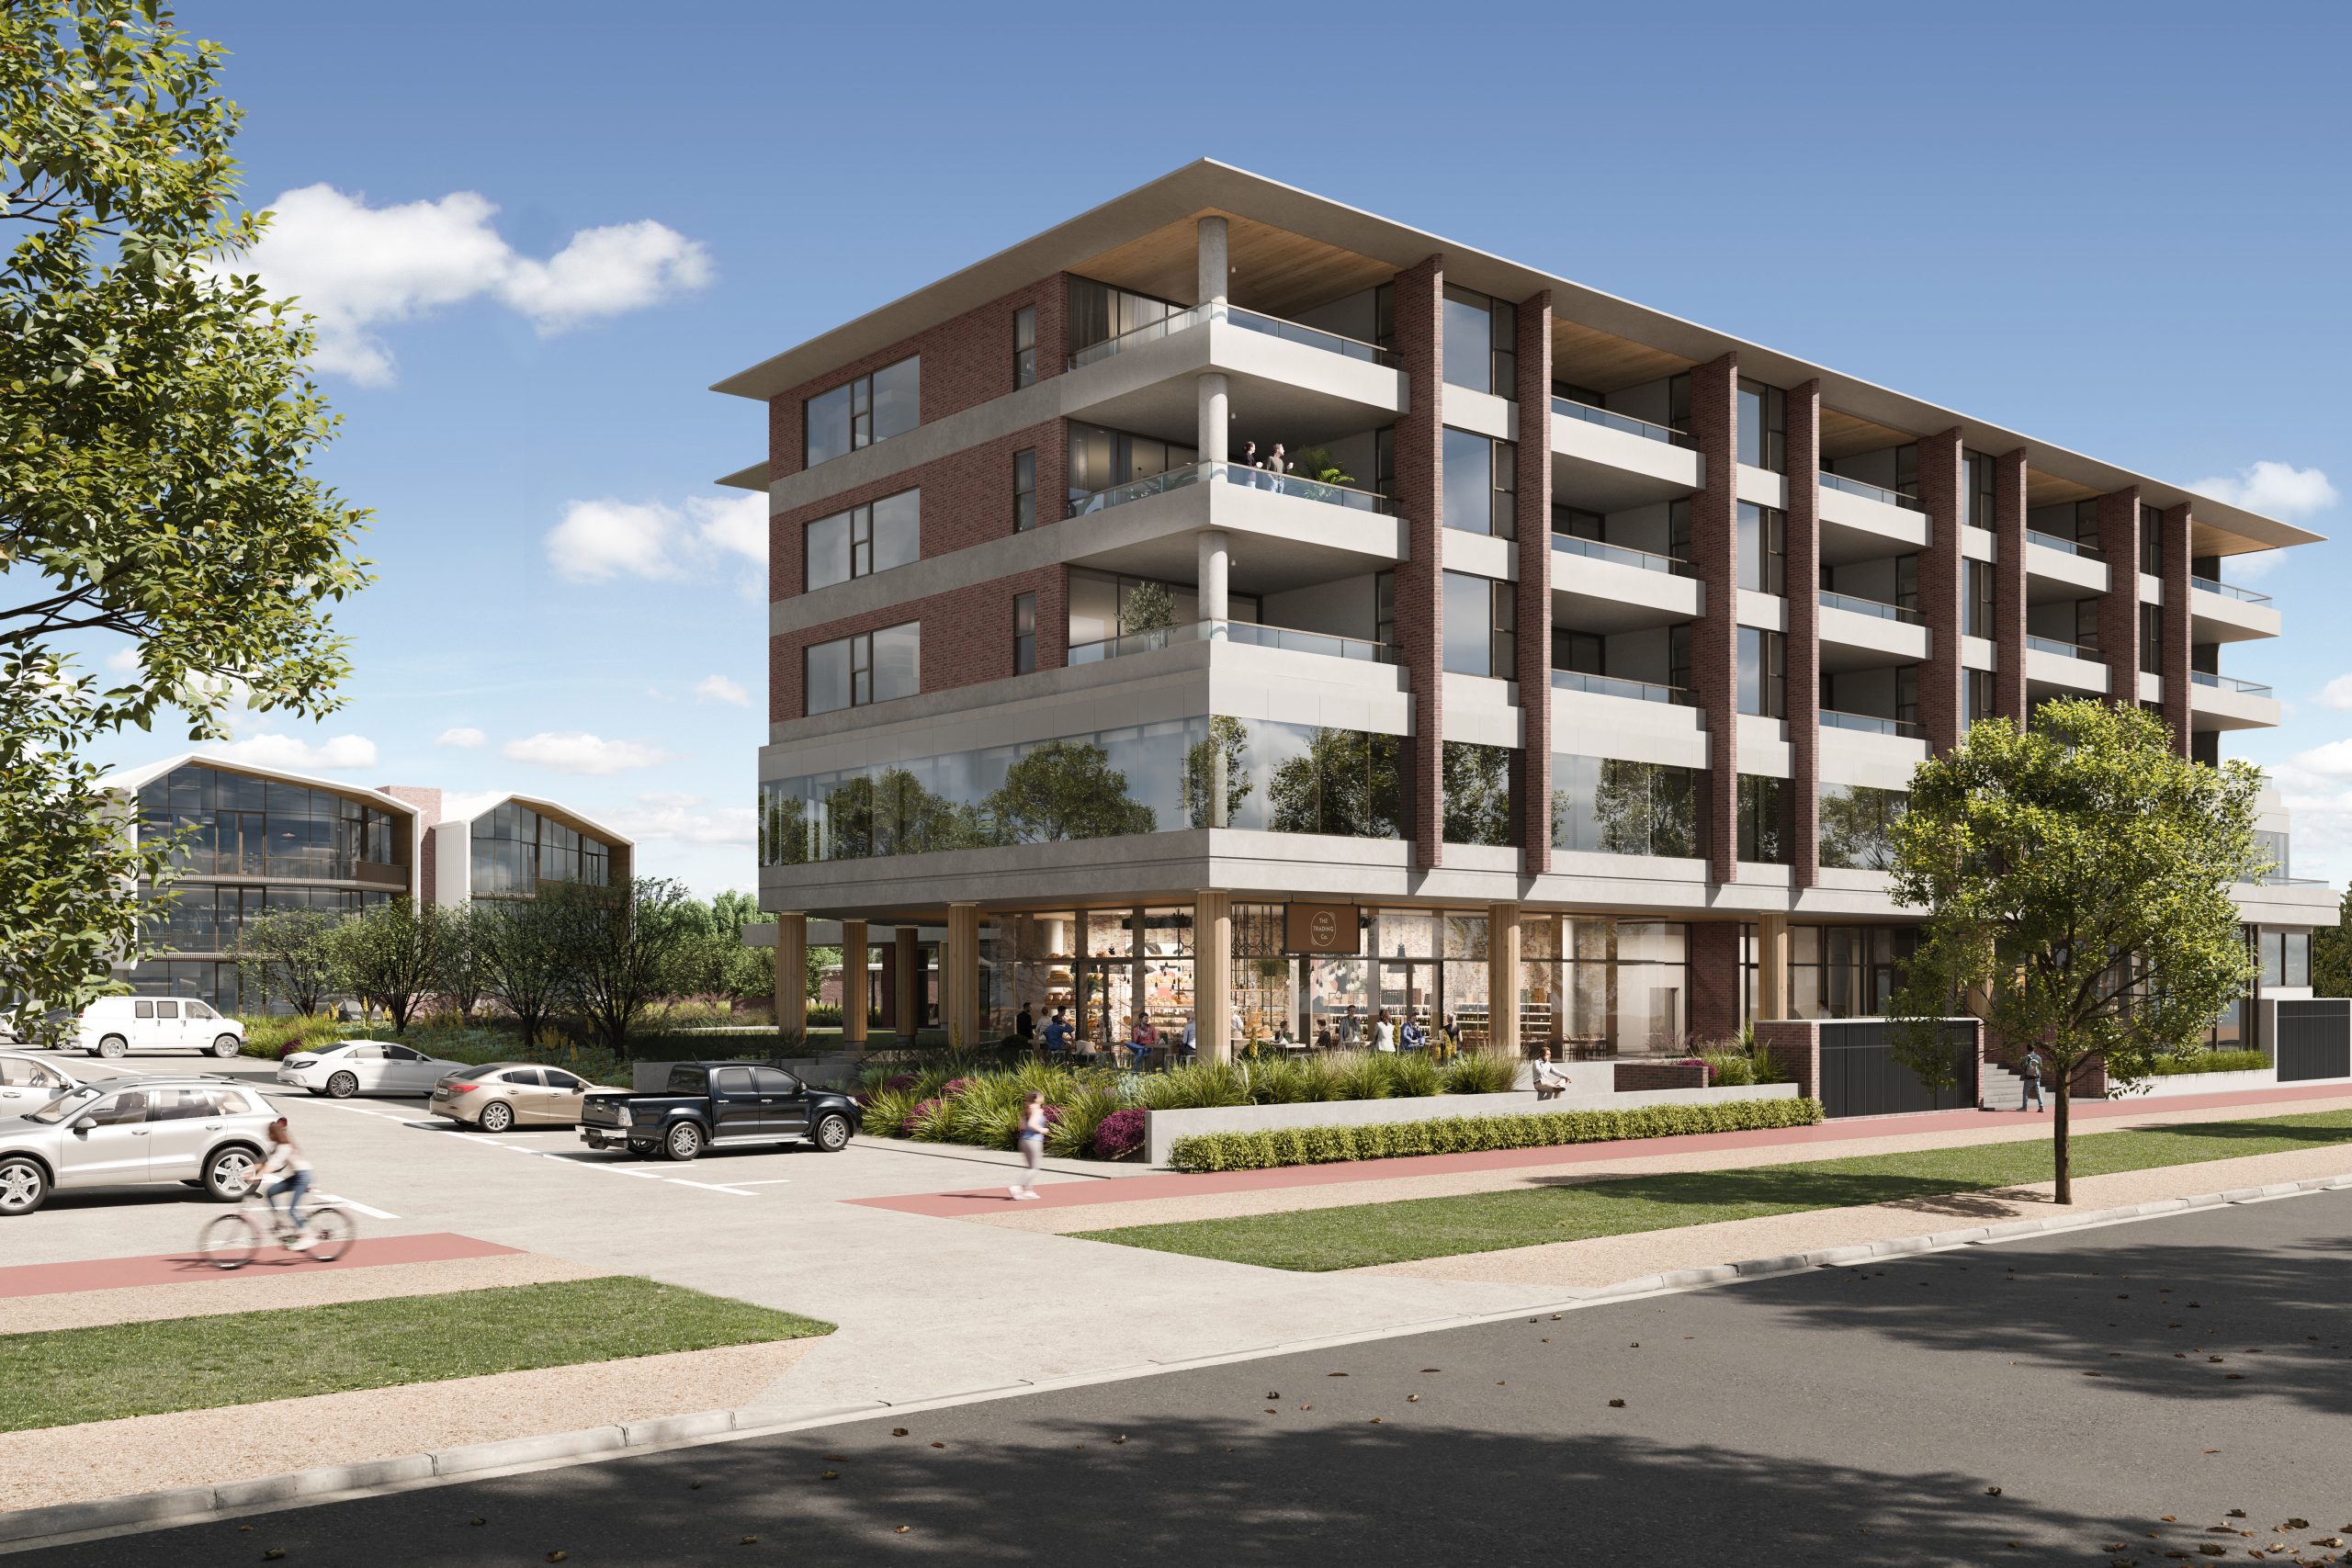 The Quarter, Wodonga residential, retail and commercial development launched